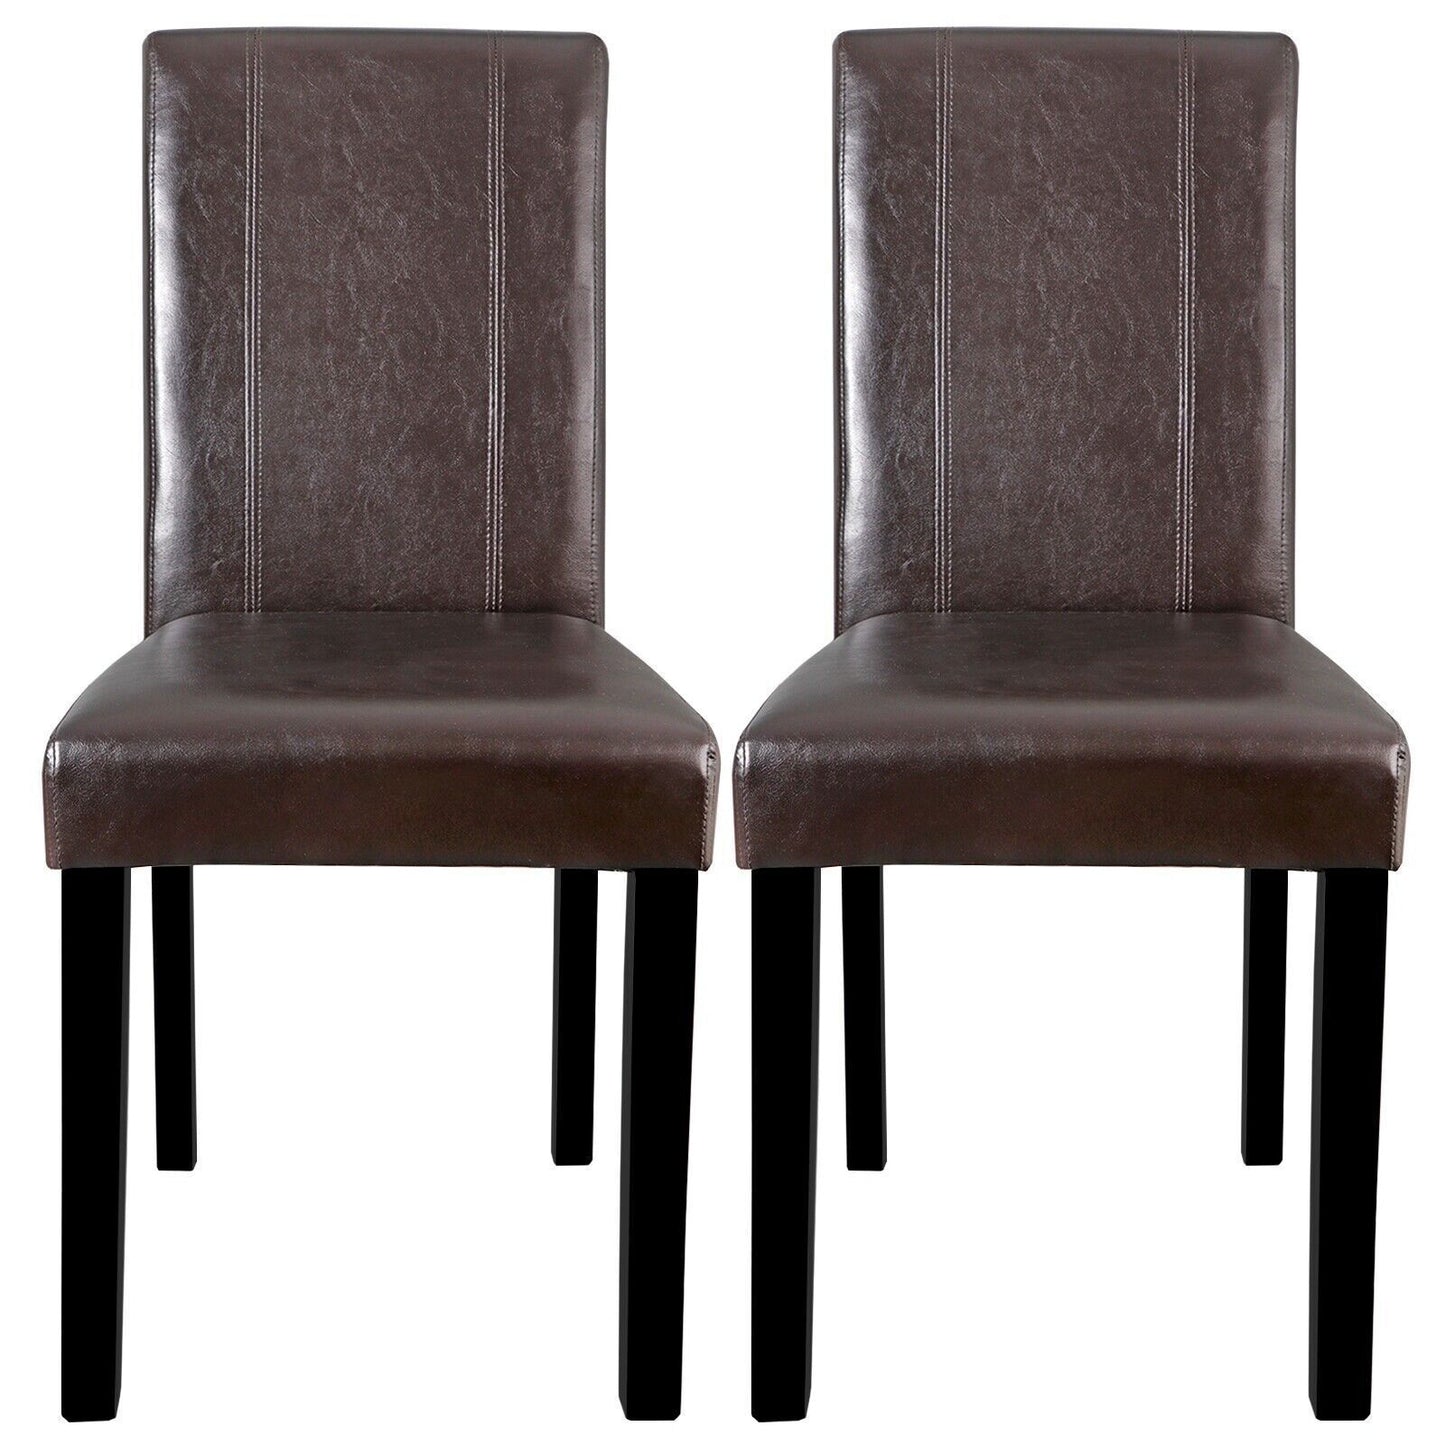 2 Set of Dining Chairs Simple Style Urban Leather Dining Parson Seats Brown